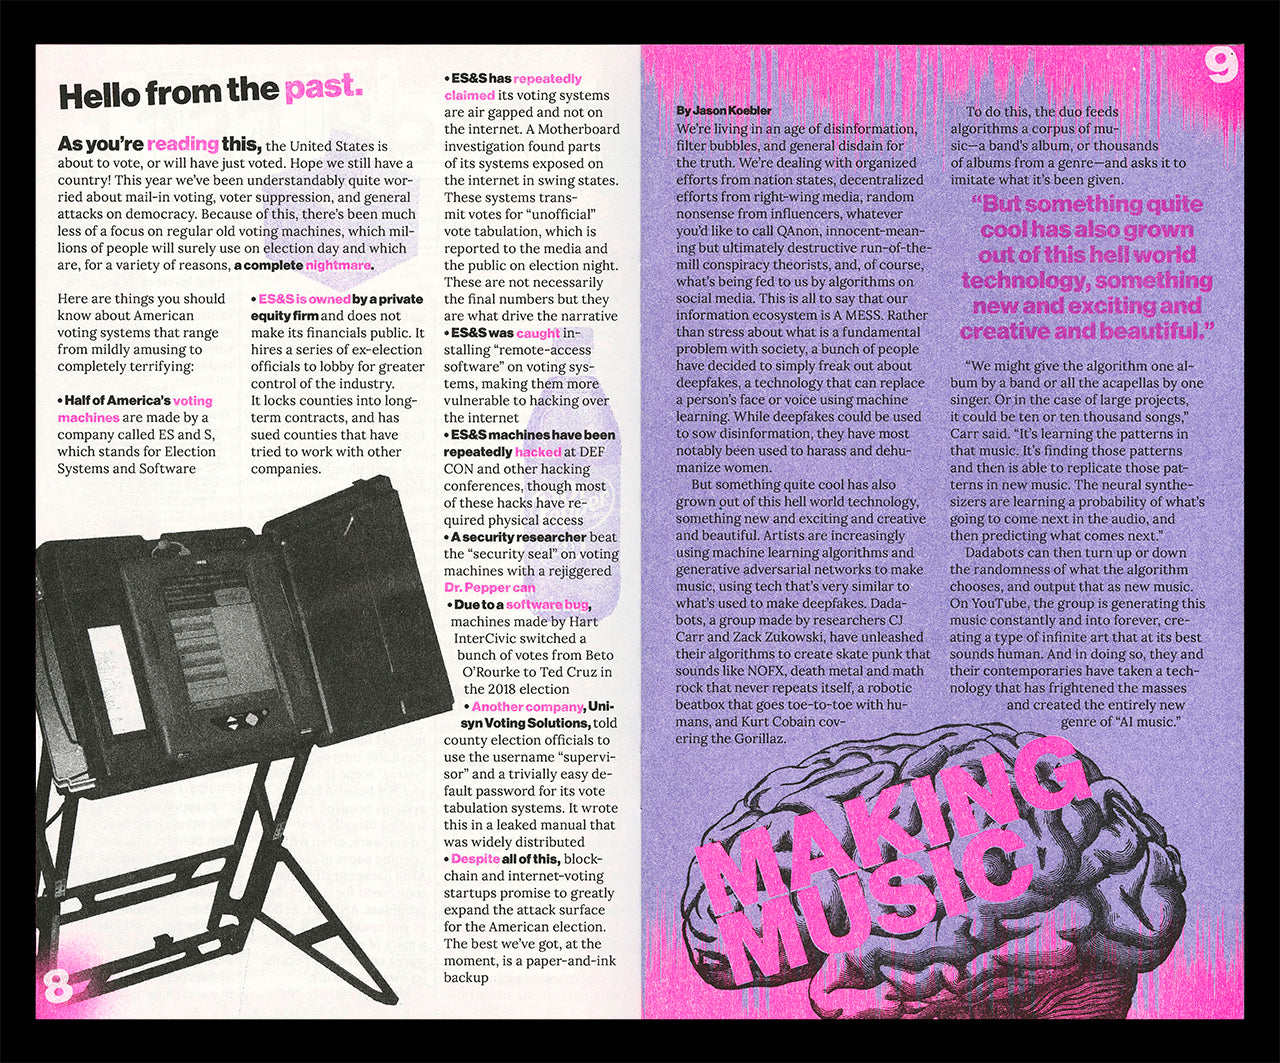 Interior spread of Motherboard's zine "The Mail" featuring an article titled "Hello from the Past"